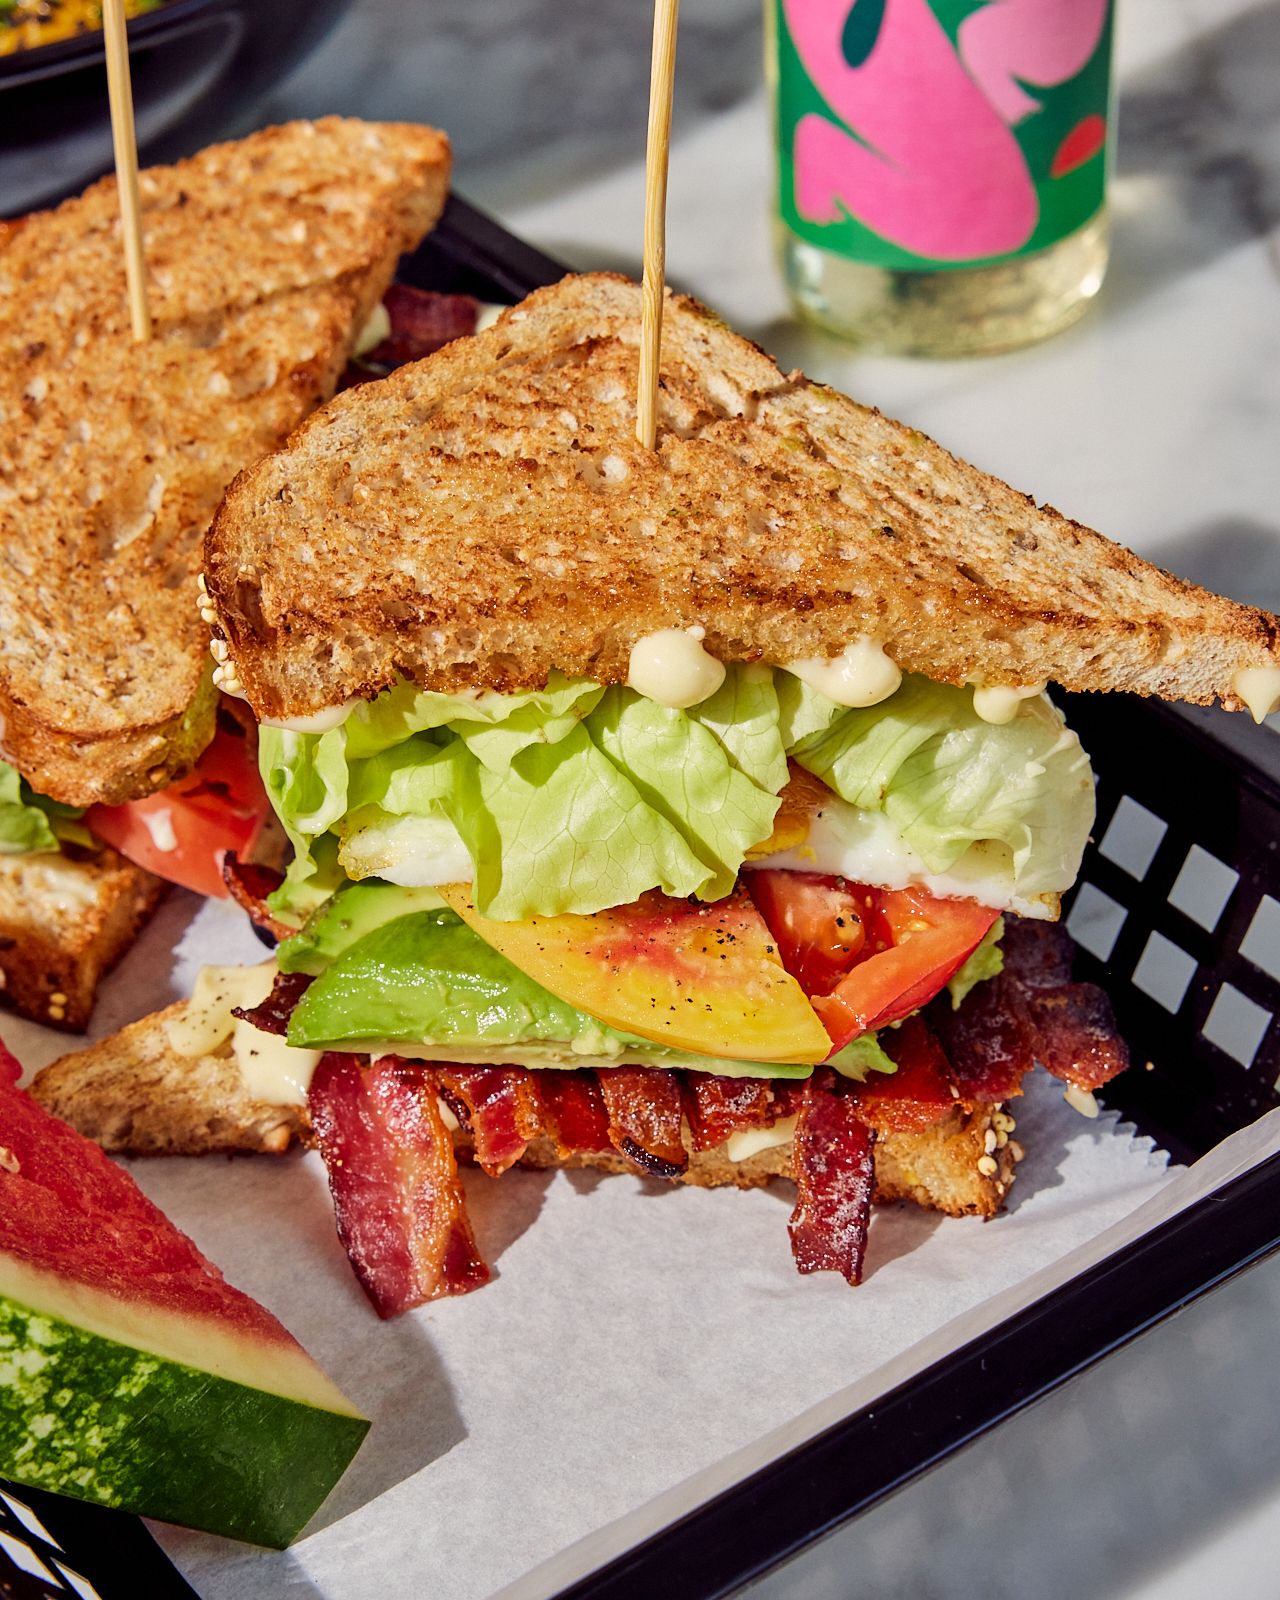 A sandwich with lettuce and bacon strips and other vegetables.